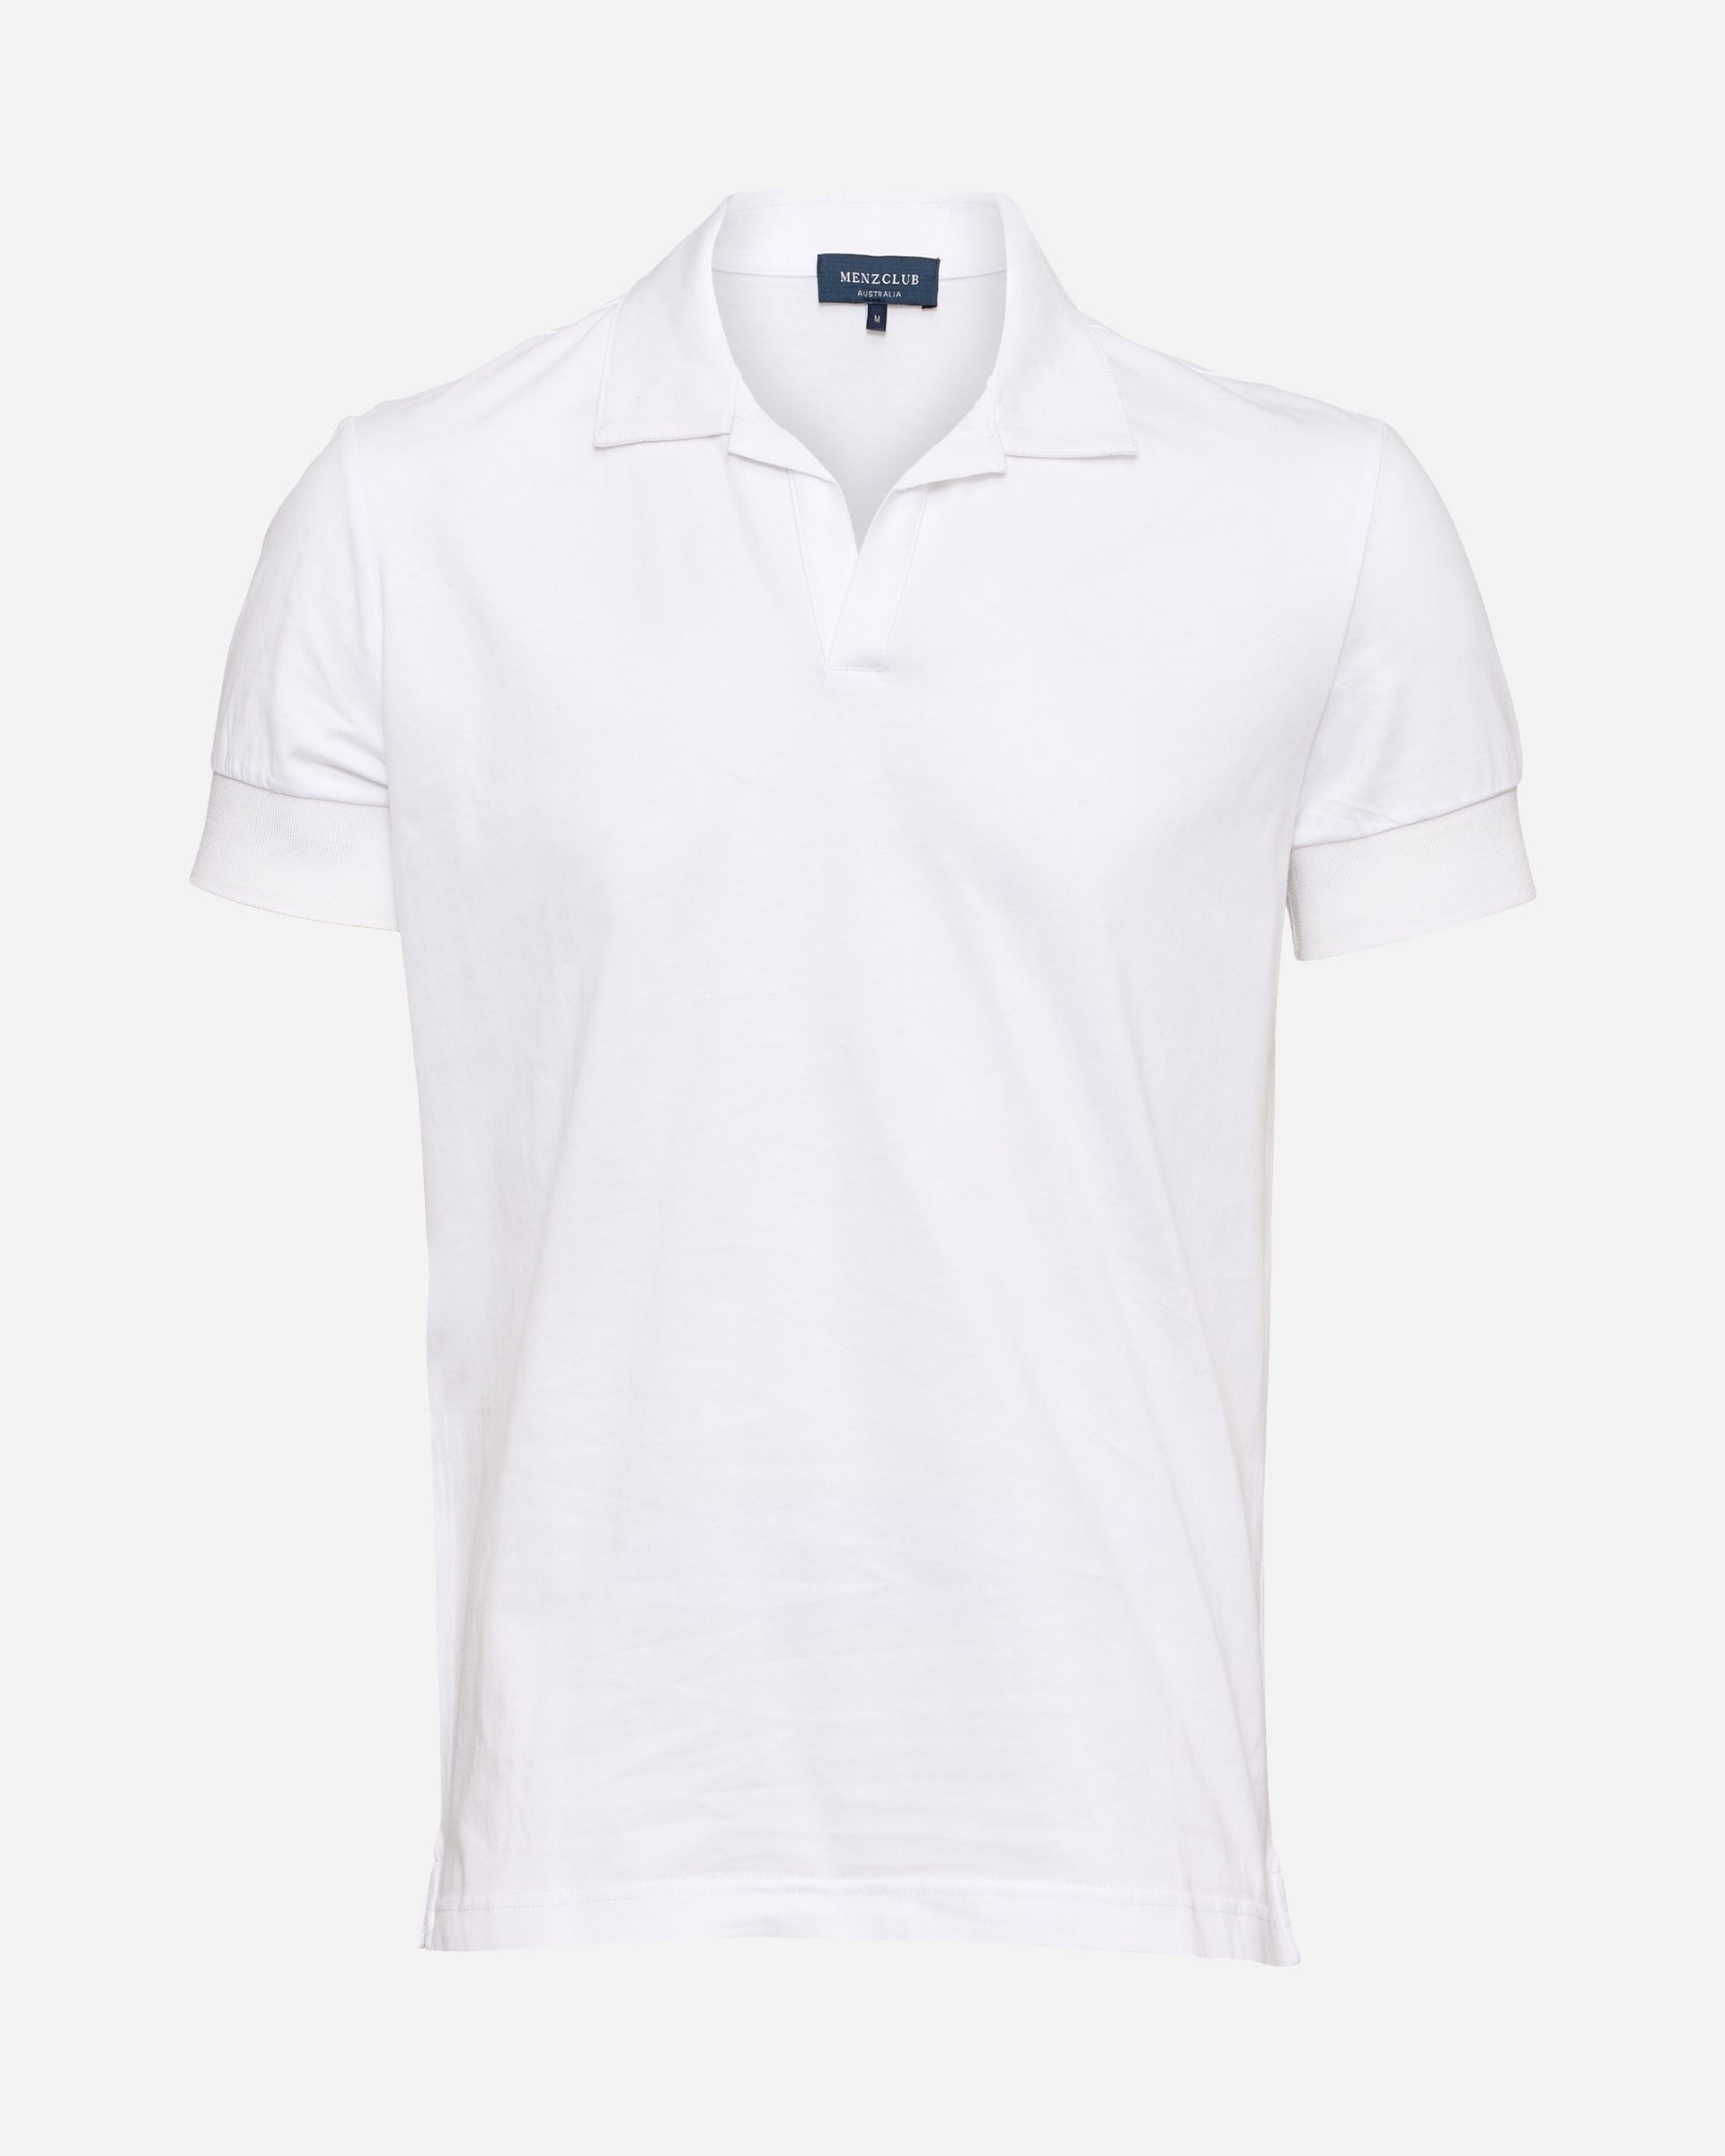 Structured Polo - Men's Polo Shirts at Menzclub